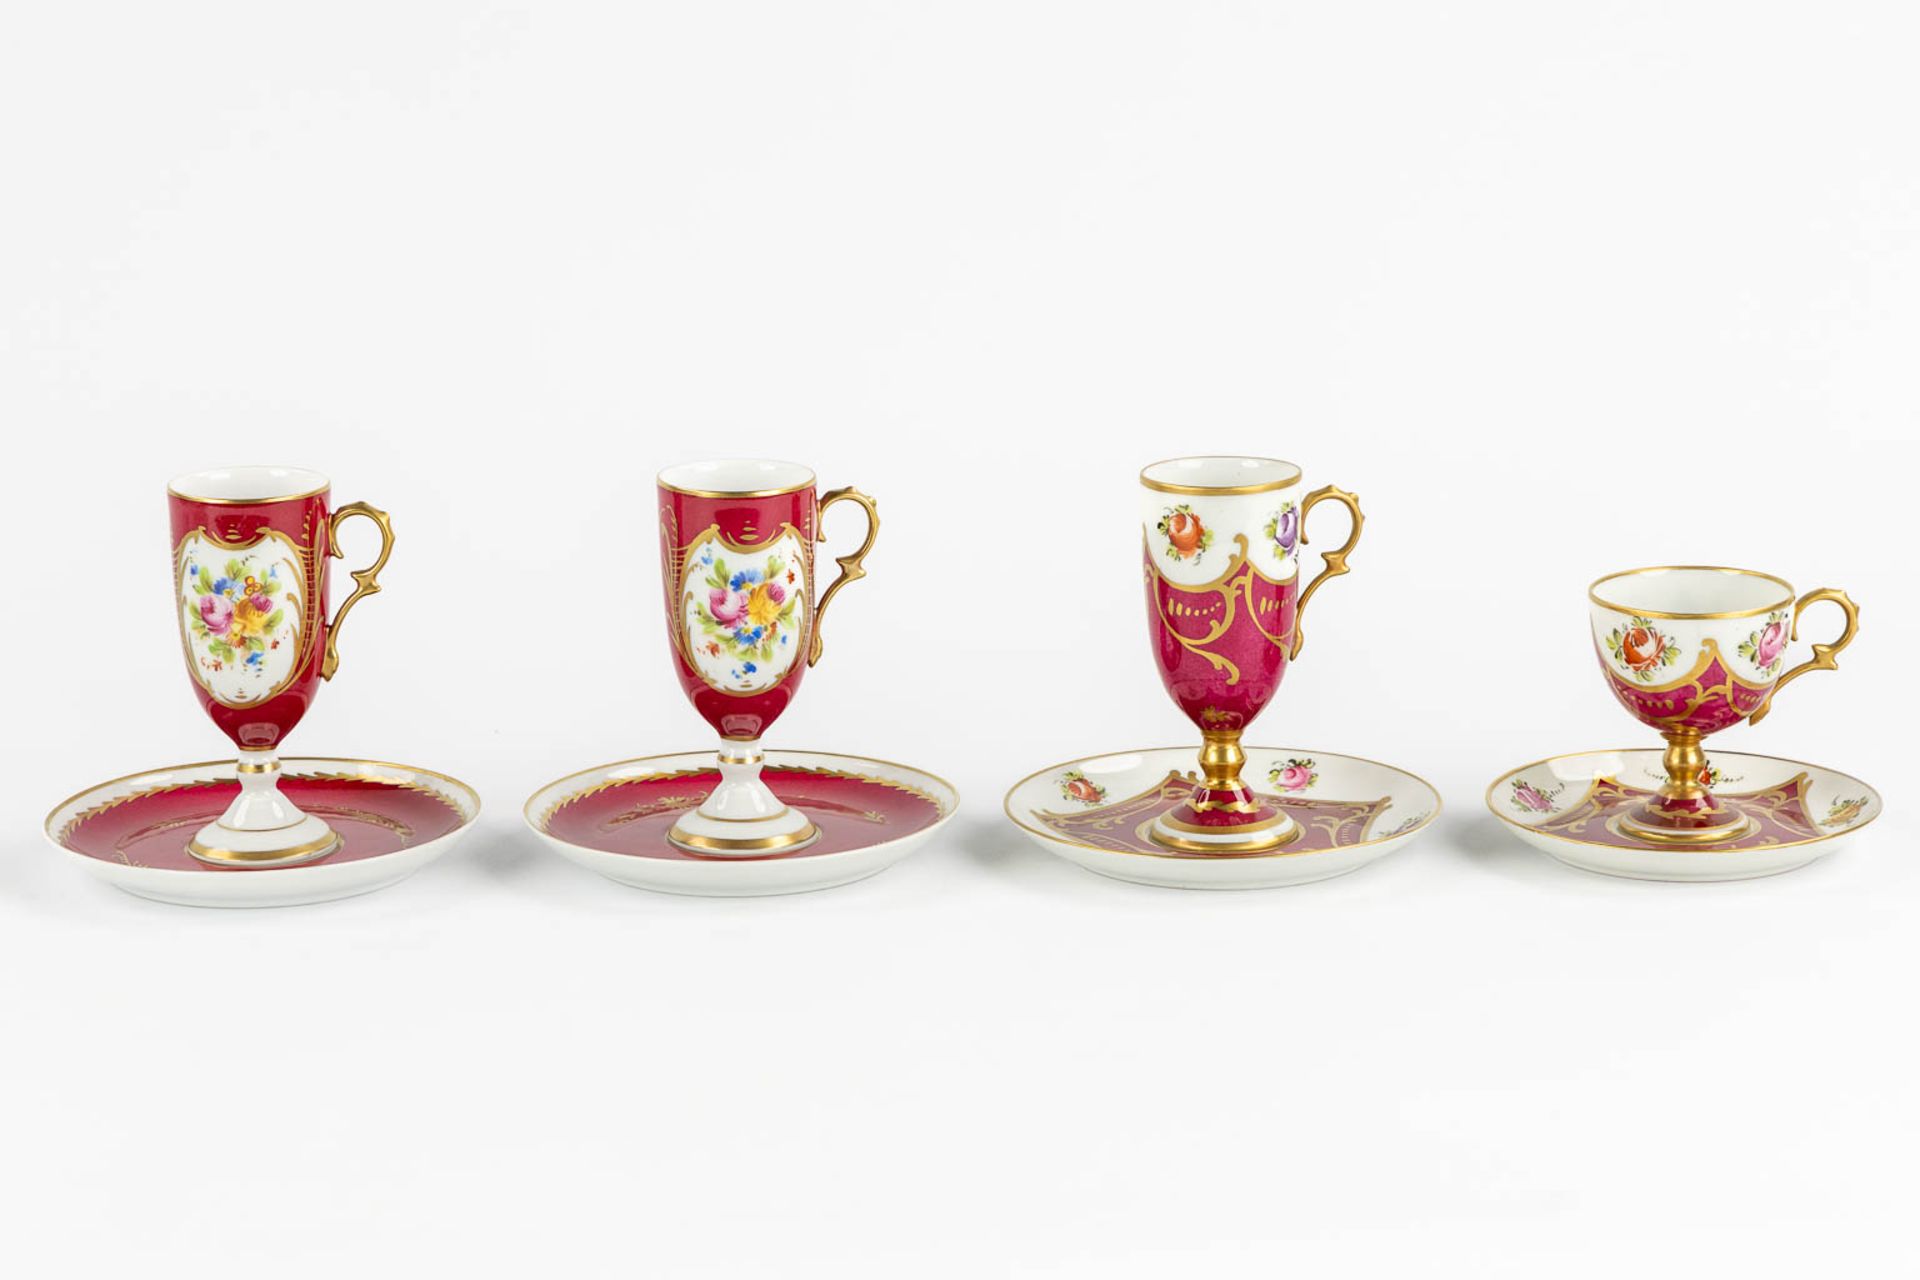 Giraud Limoges, a coffee service and serving ware, polychrome porcelain. 20th C. (H: 24 cm) - Bild 15 aus 16